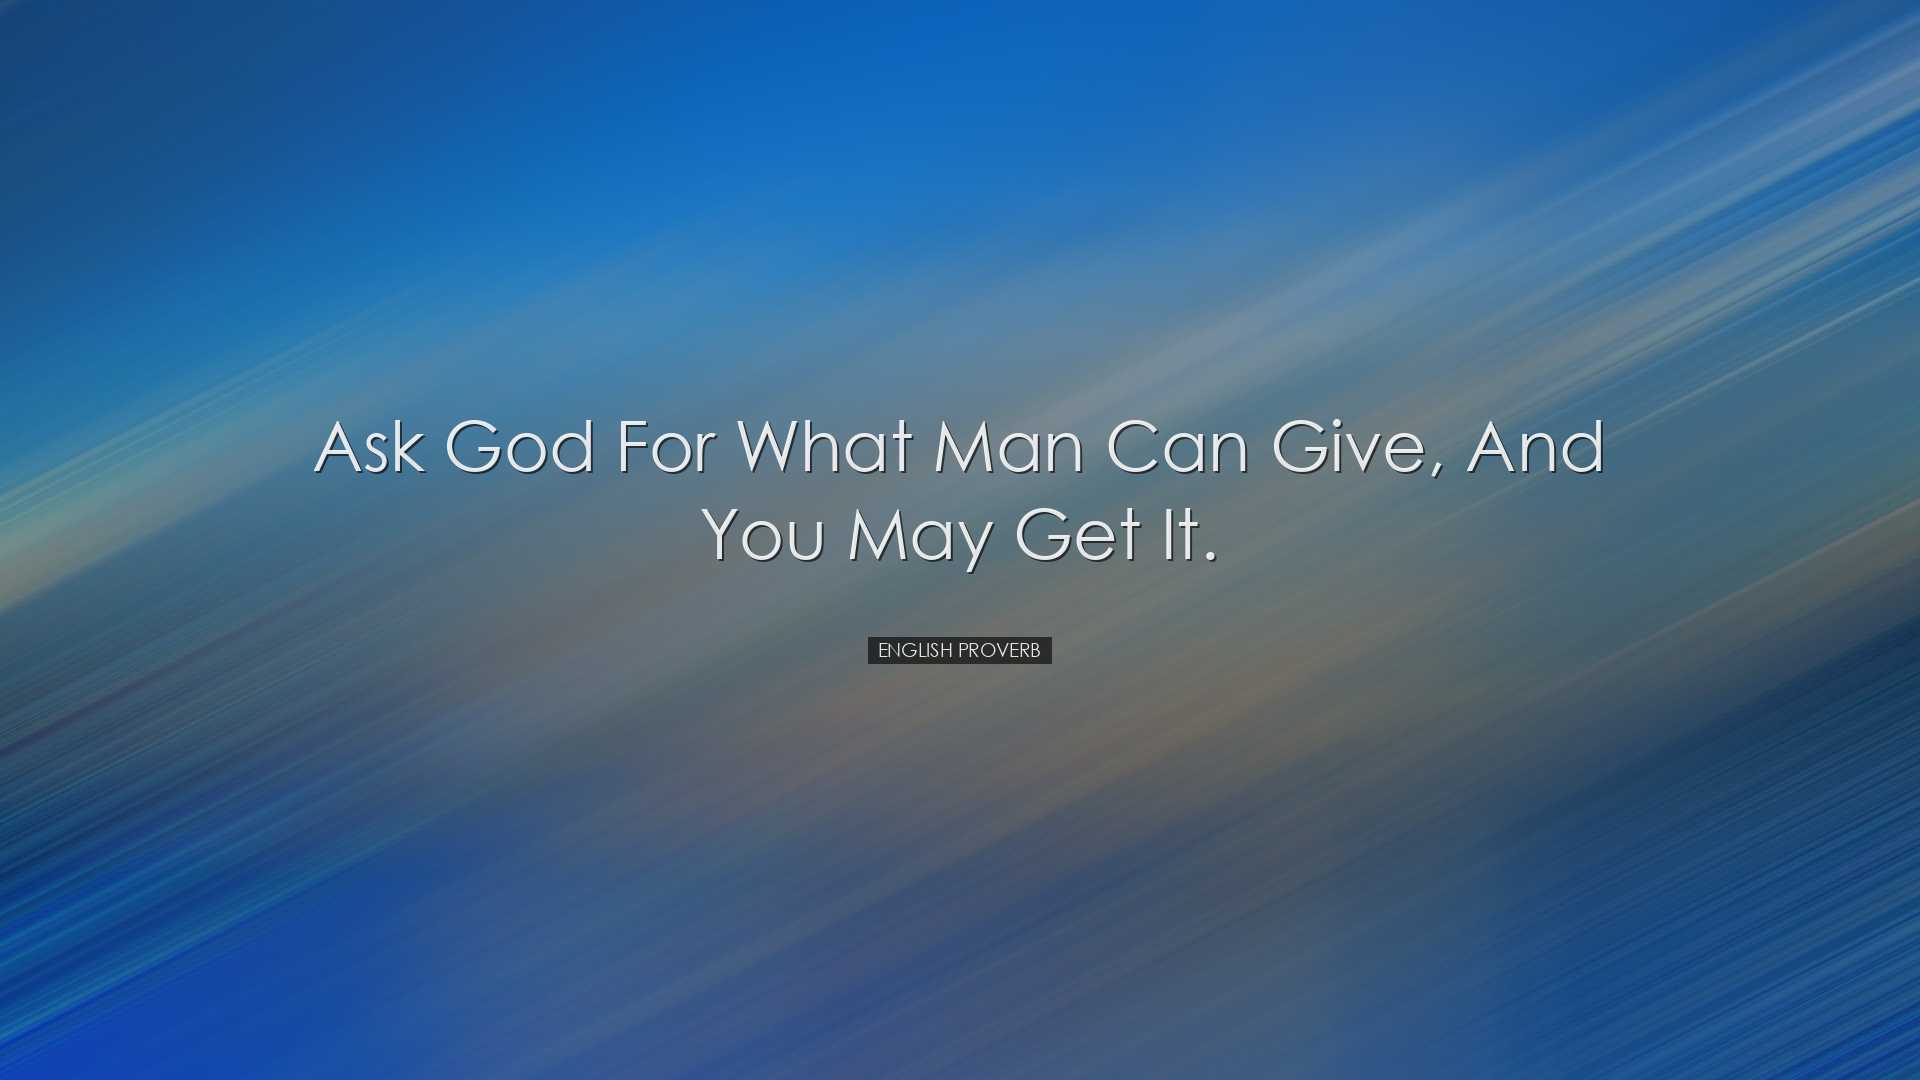 Ask God for what man can give, and you may get it. - English Prove